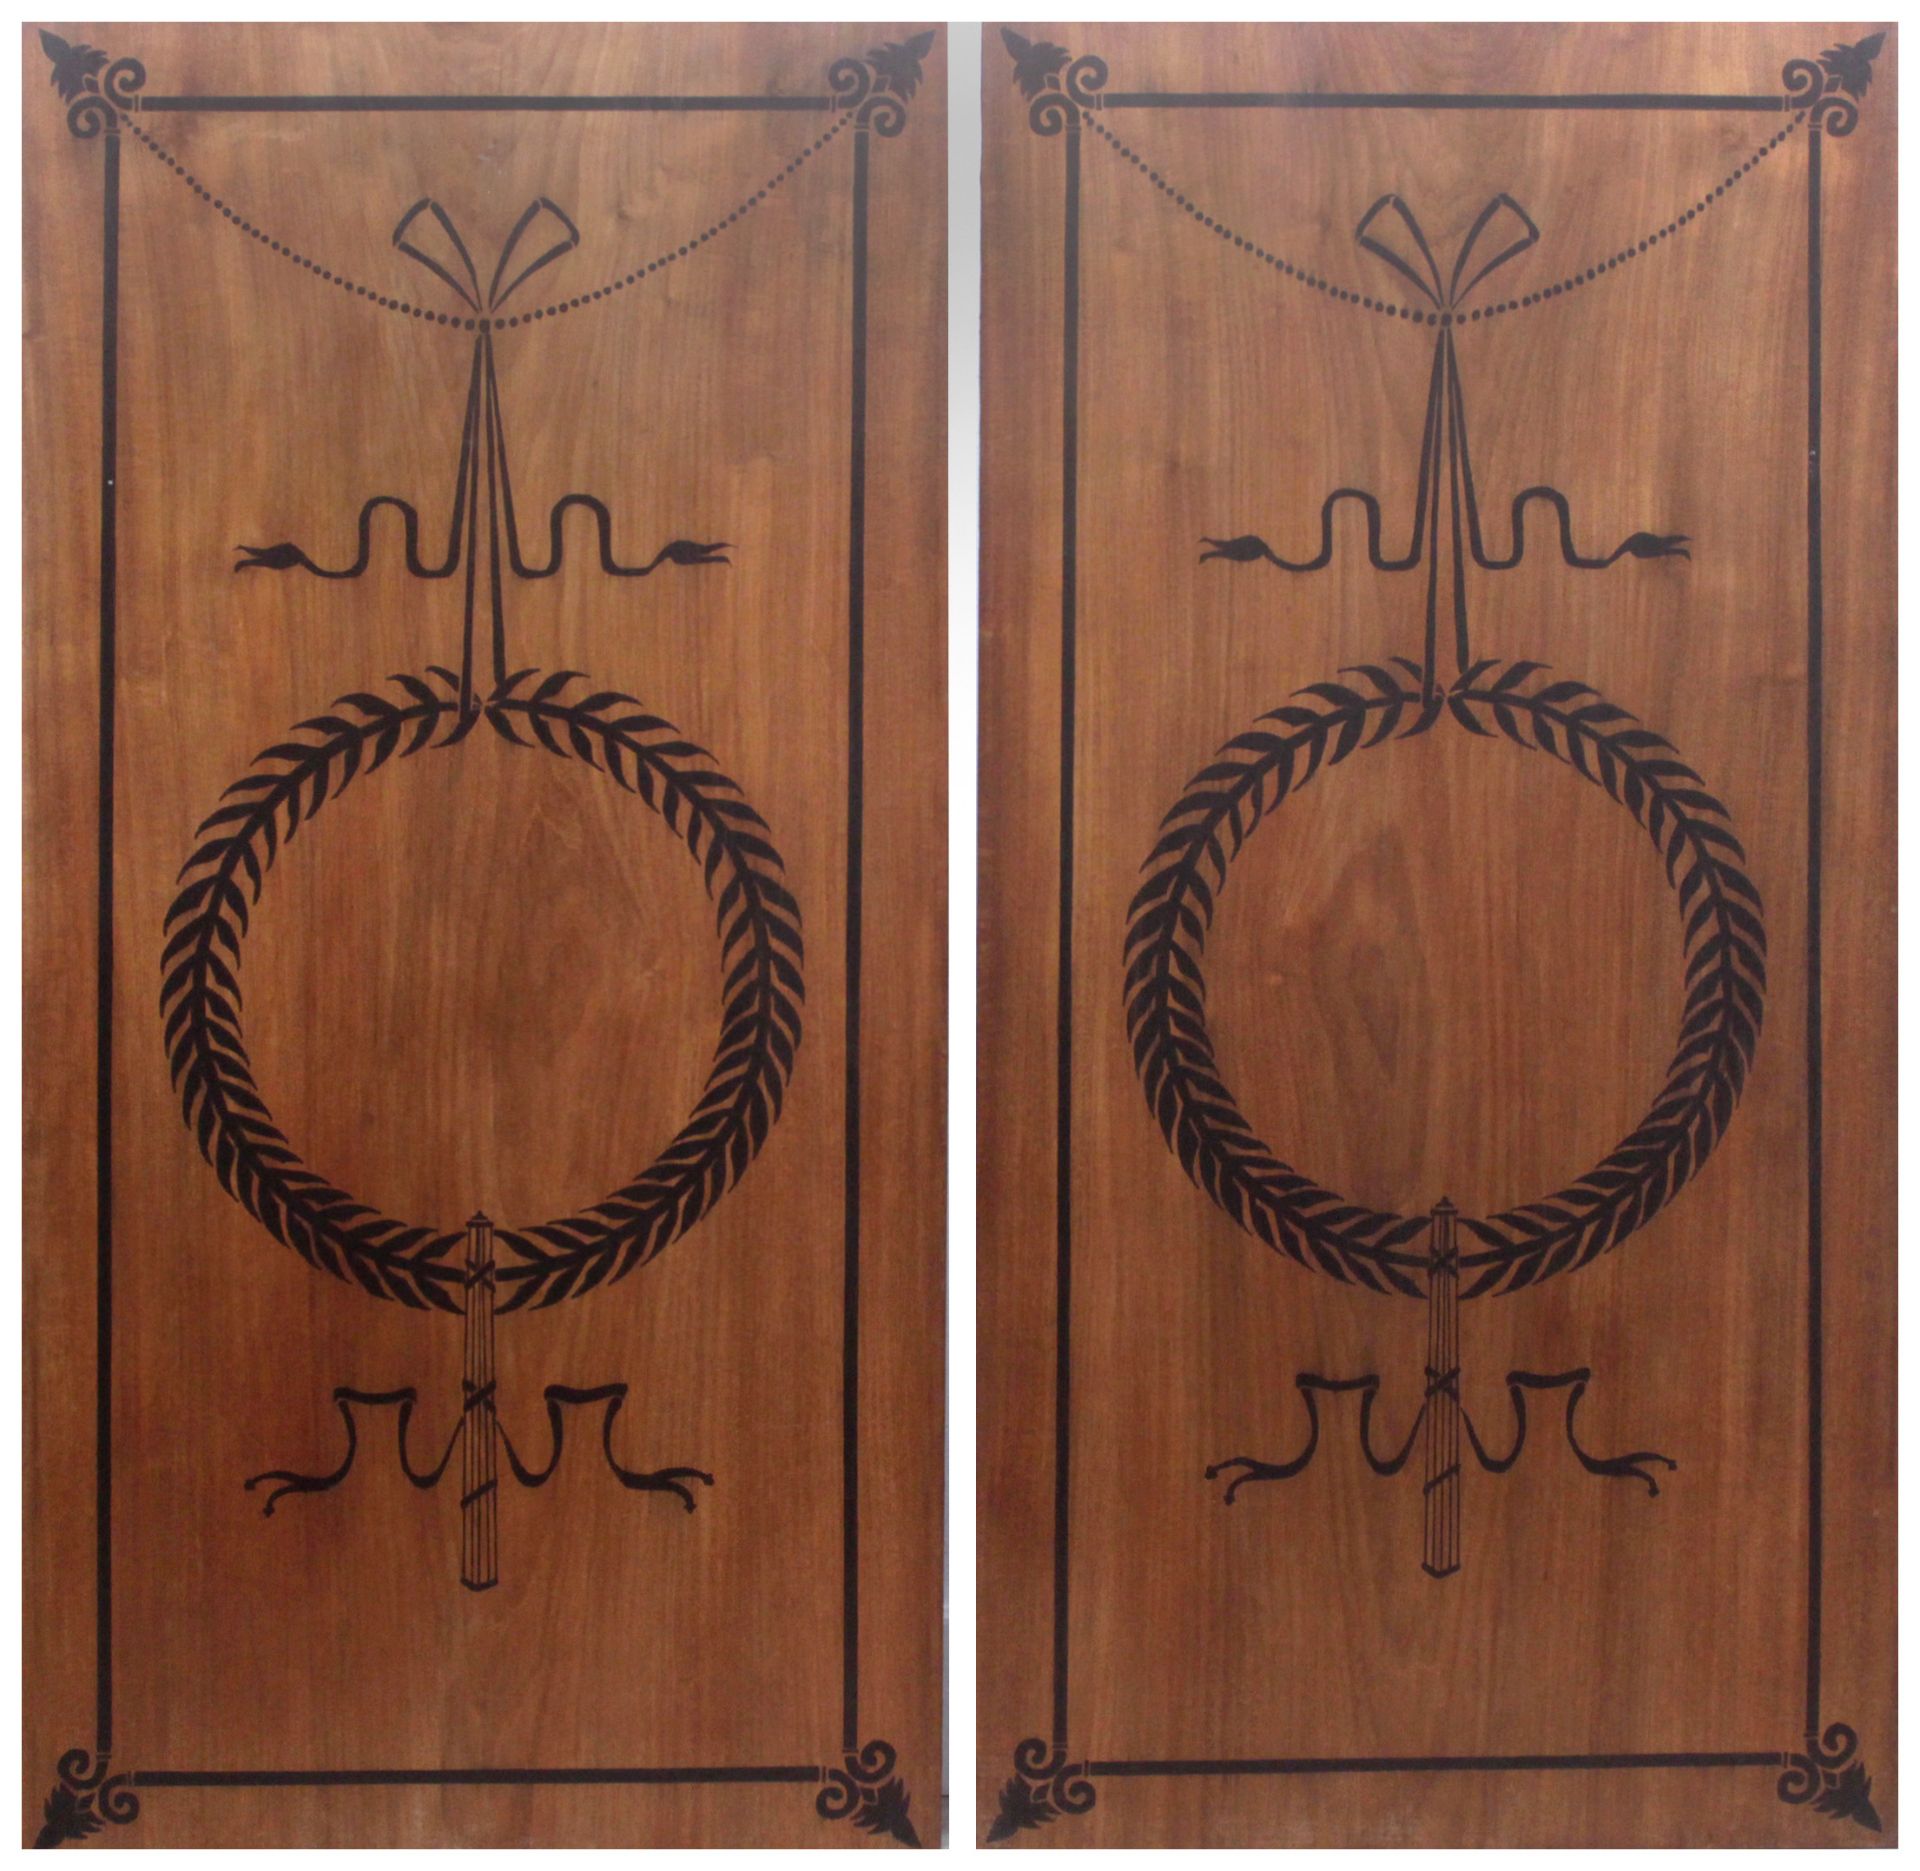 A pair of 20th century Empire style wall plaques